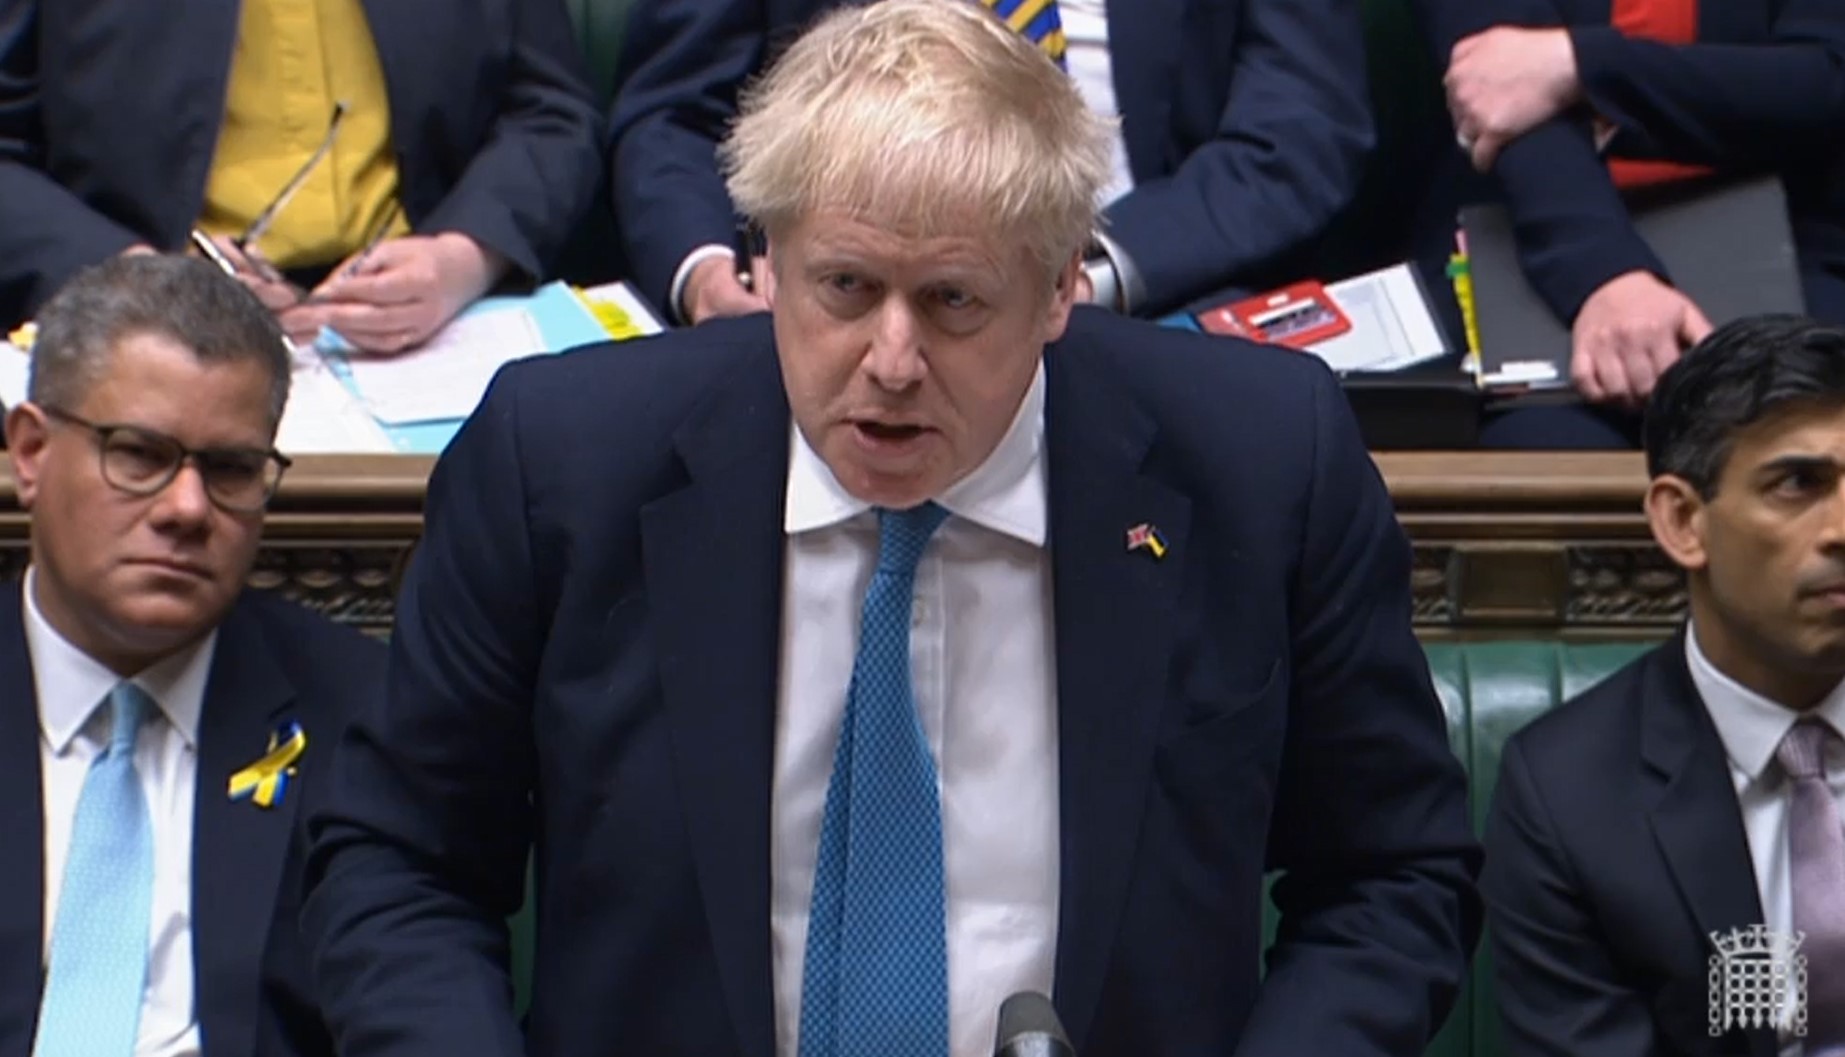 Prime Minister Boris Johnson speaks during Prime Minister's Questions in the House of Commons, London, on March 2.